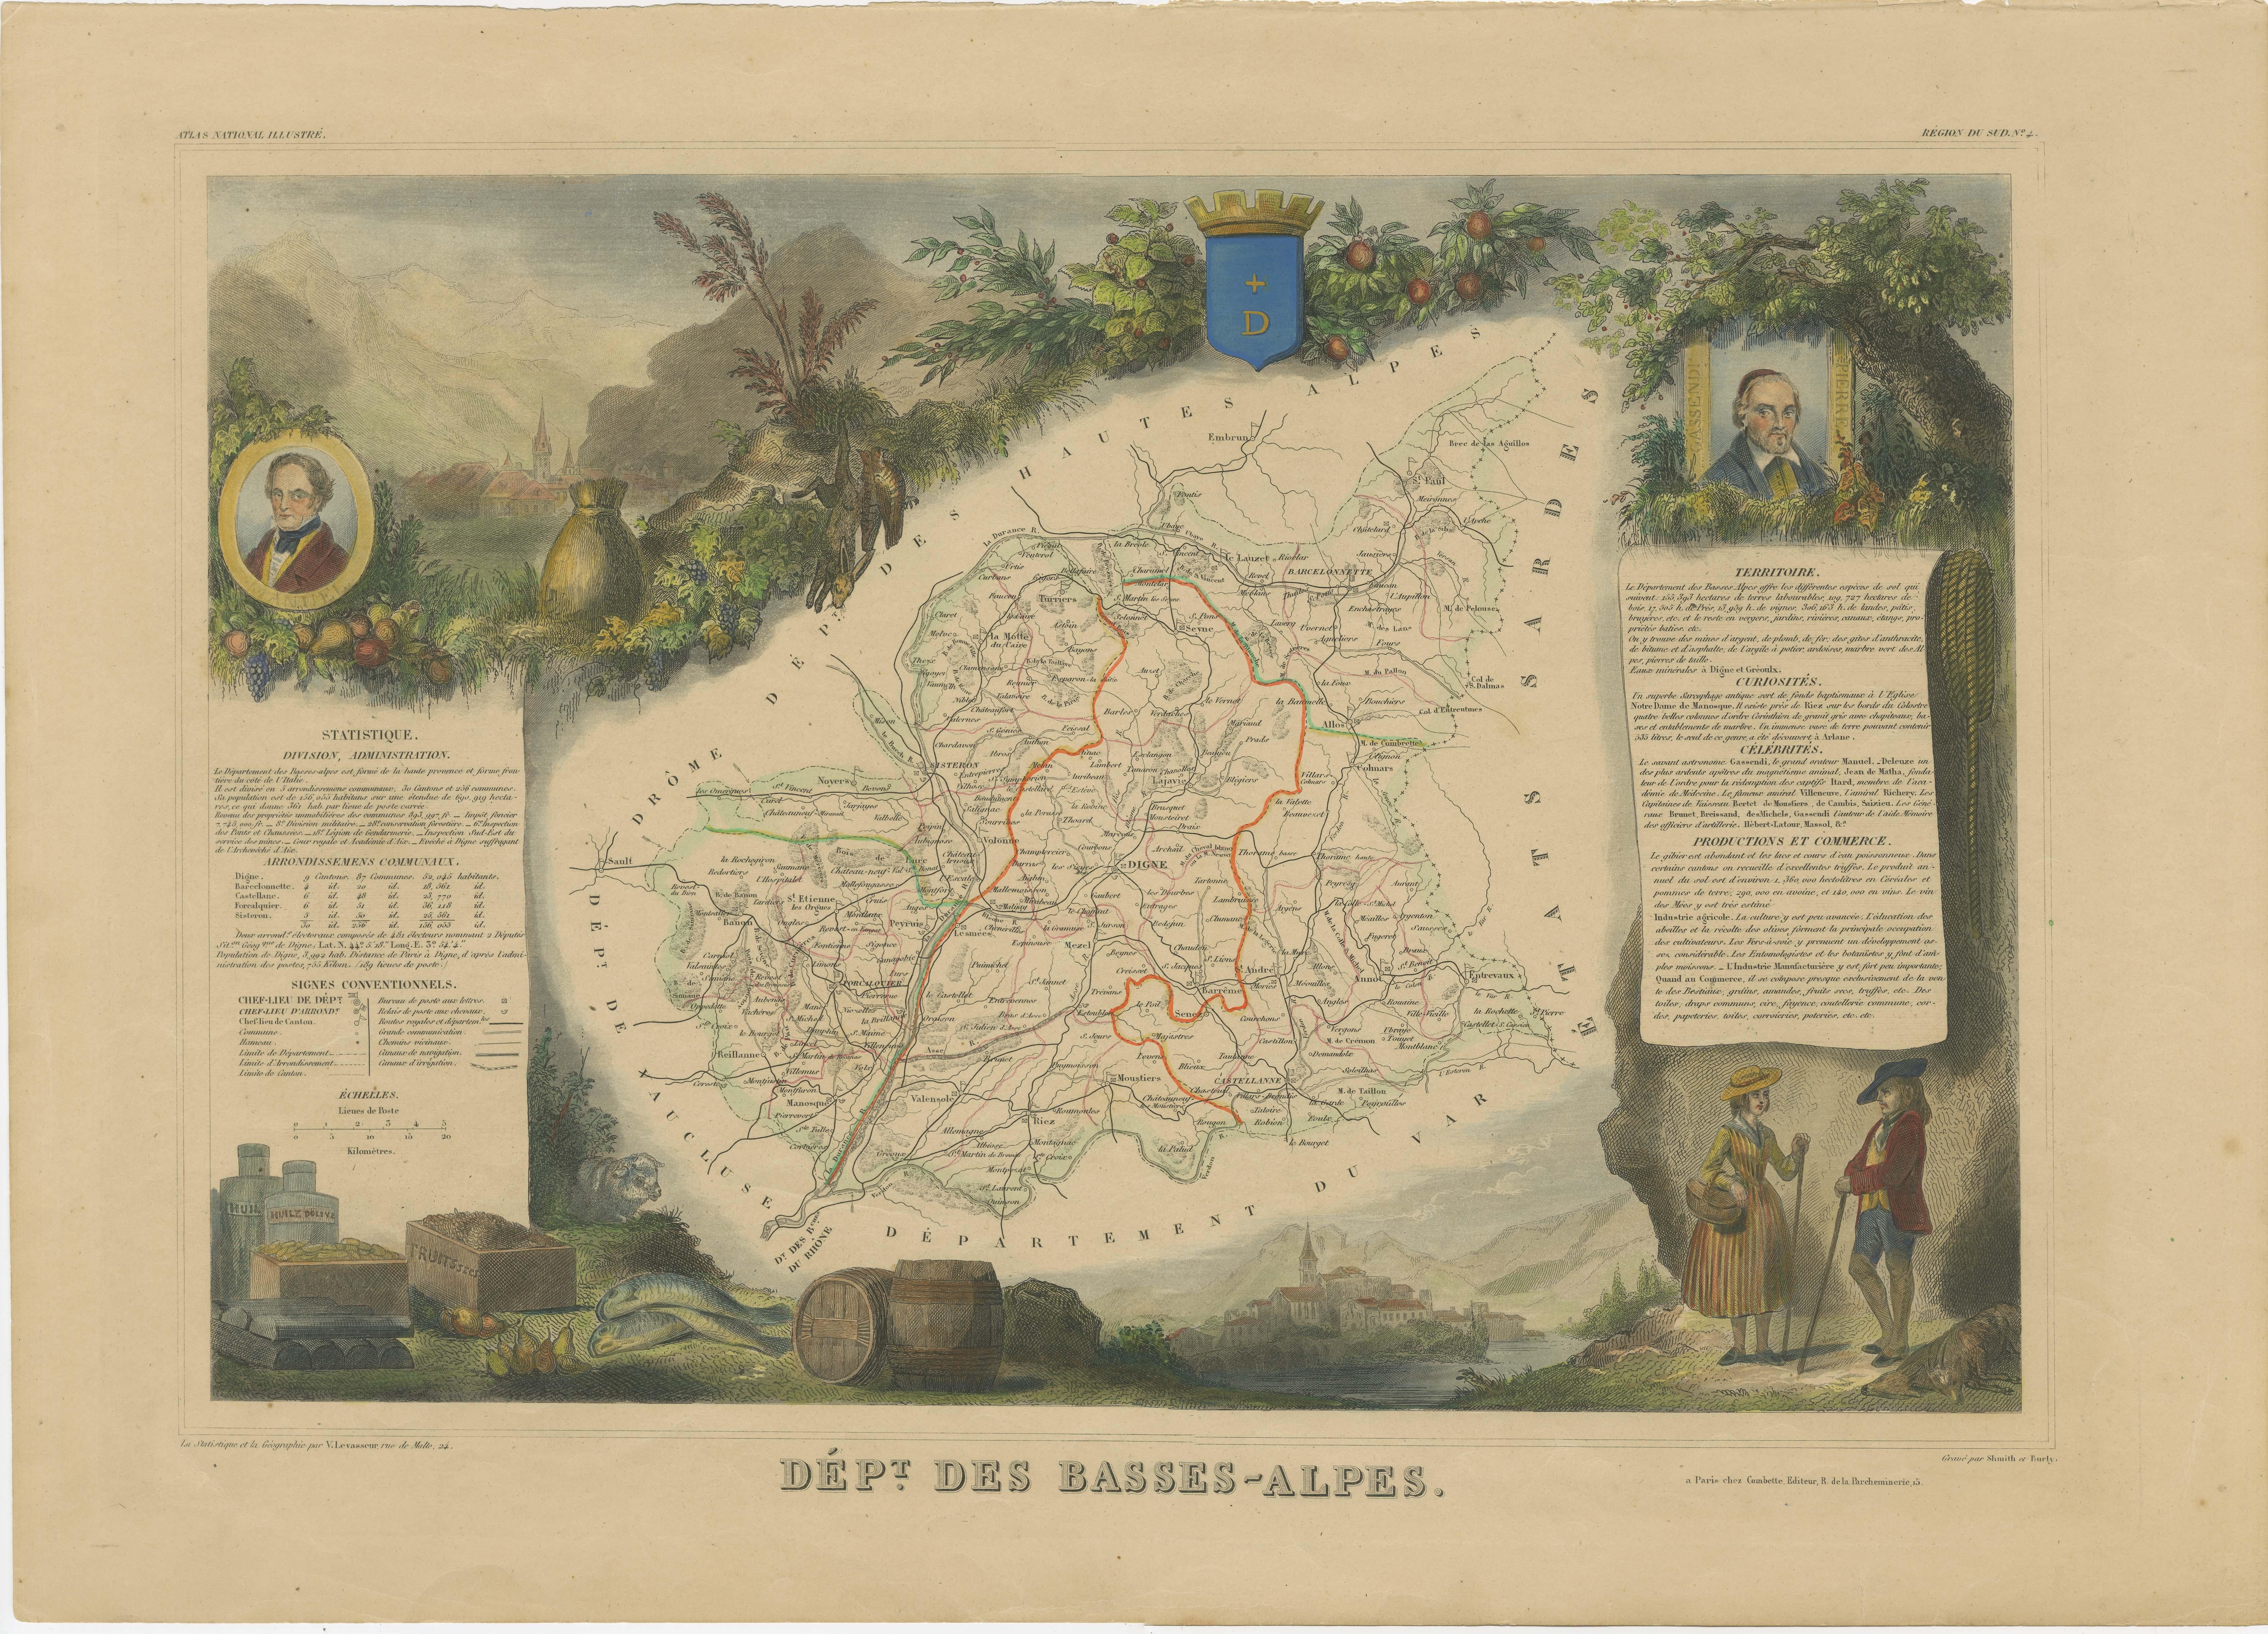 Antique map titled 'Dépt. de l'Aube'. Map of the French department of Basses-Alpes, France. The whole is surrounded by elaborate decorative engravings designed to illustrate both the natural beauty and trade richness of the land. There is a short